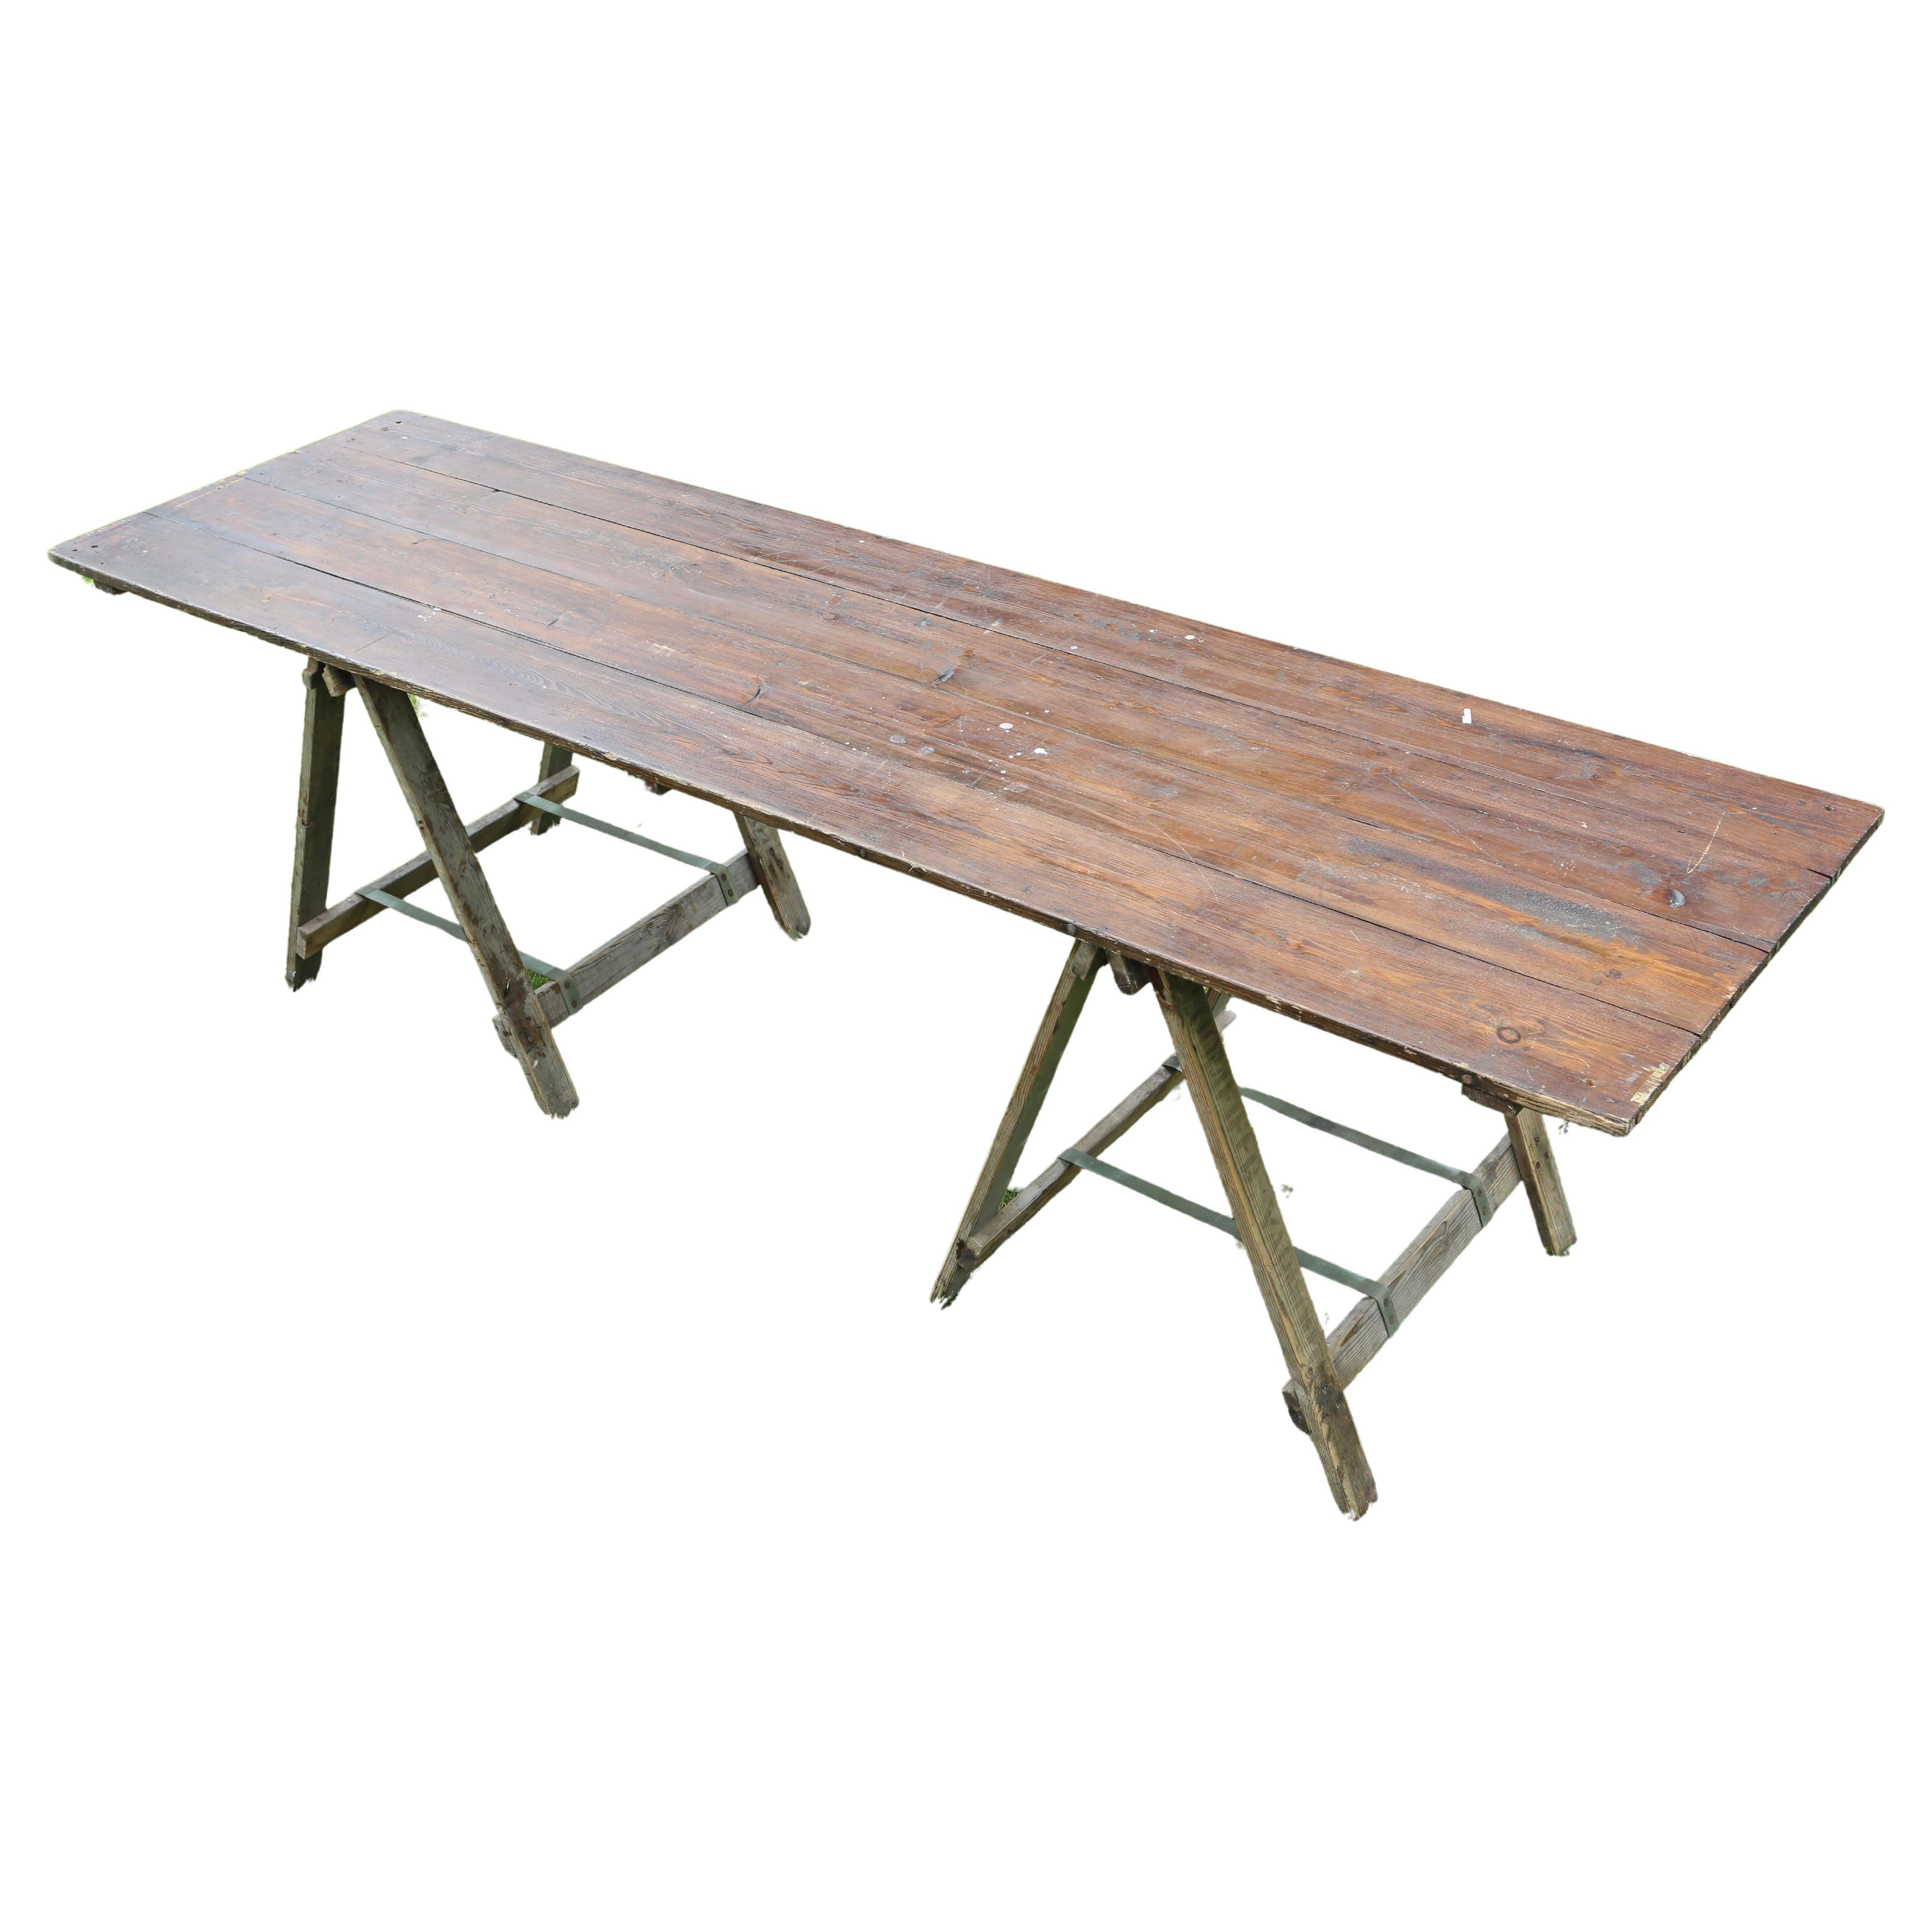 Vintage refectory trestle kitchen garden dining table mid 20th Century 8' For Sale